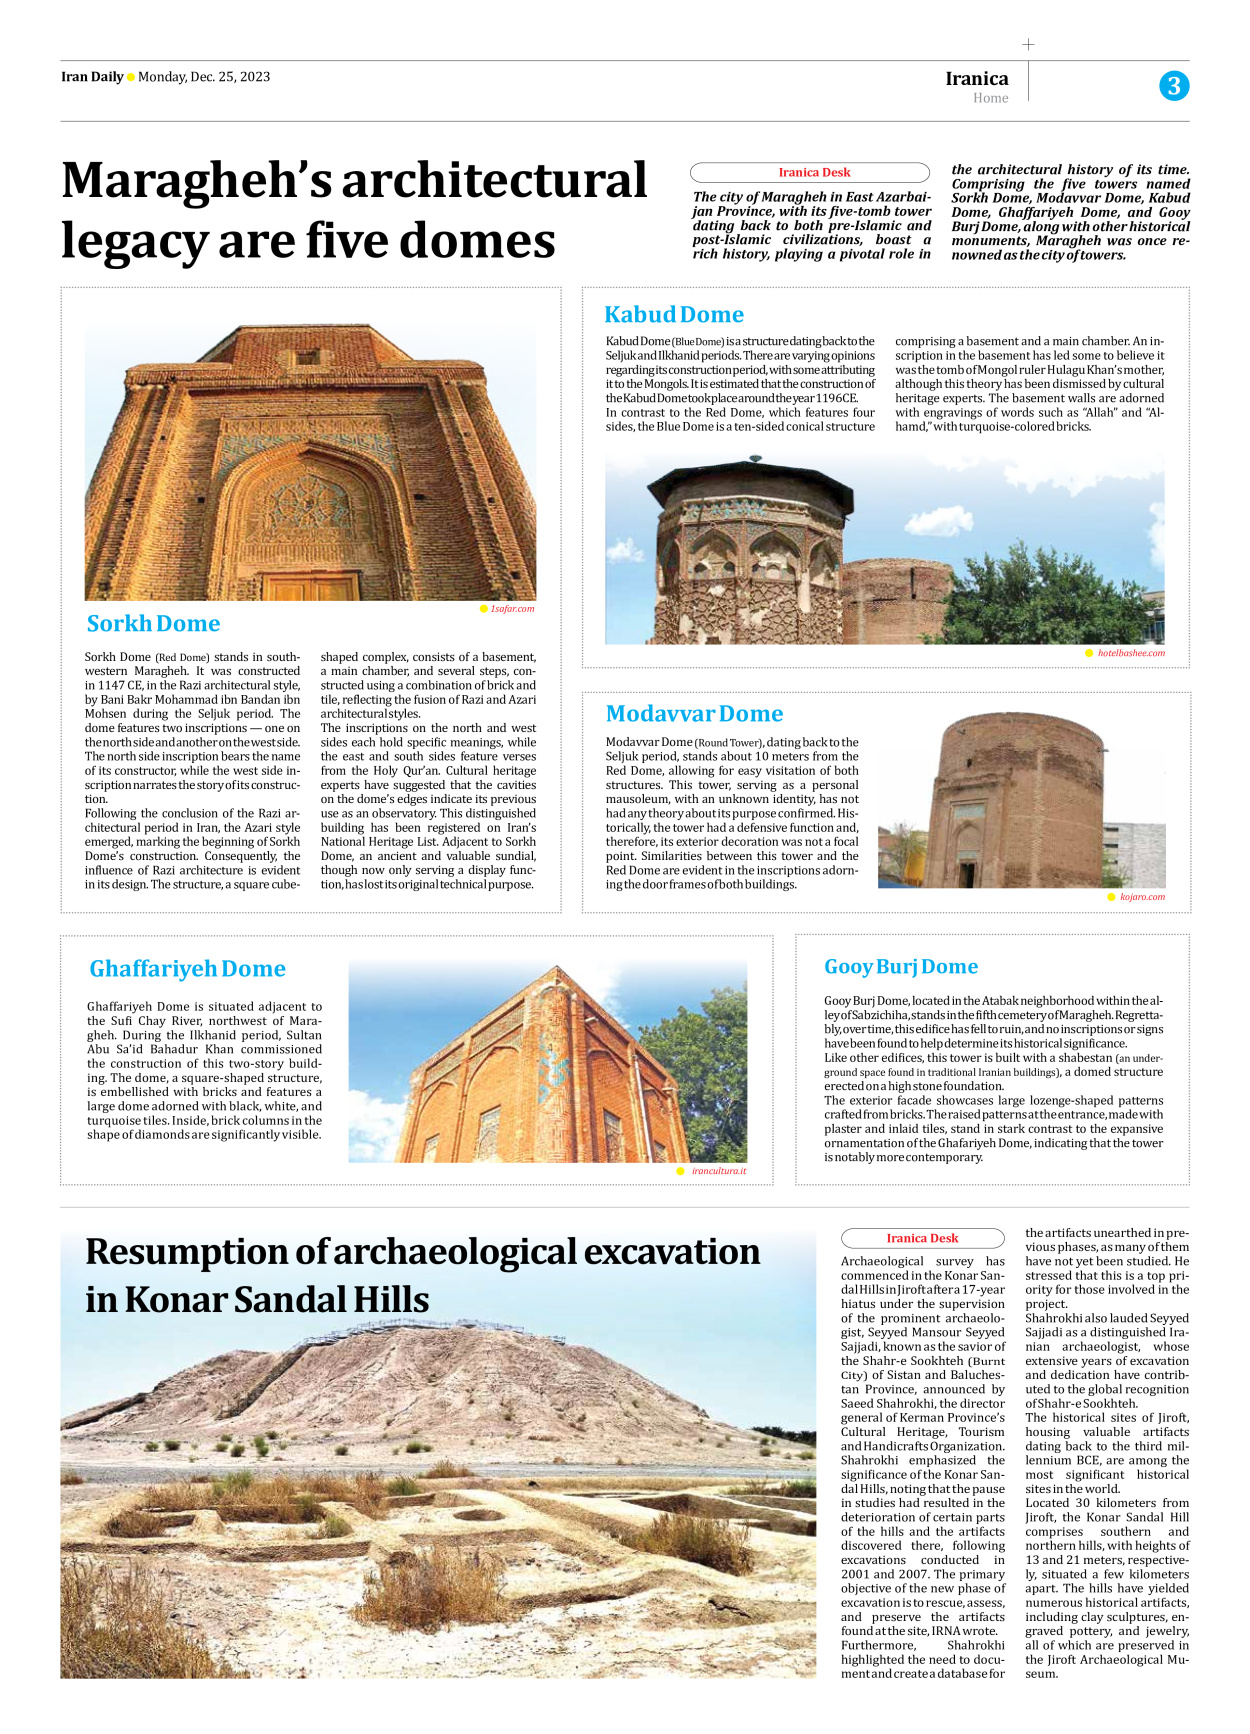 Iran Daily - Number Seven Thousand Four Hundred and Sixty Seven - 25 December 2023 - Page 3